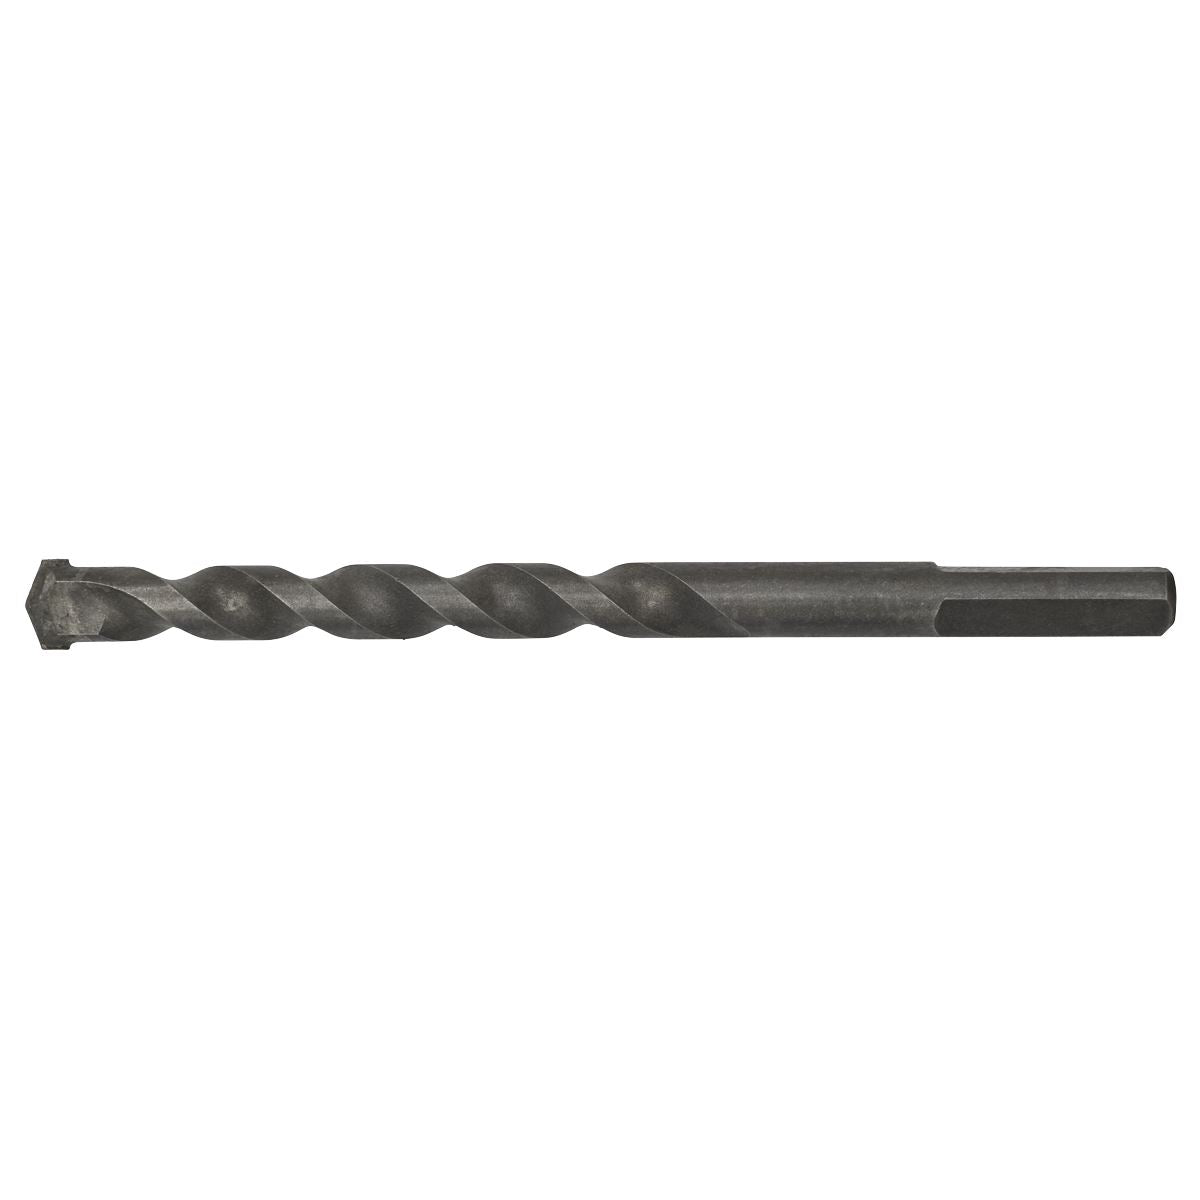 Worksafe by Sealey Straight Shank Rotary Impact Drill Bit Ø12 x 150mm